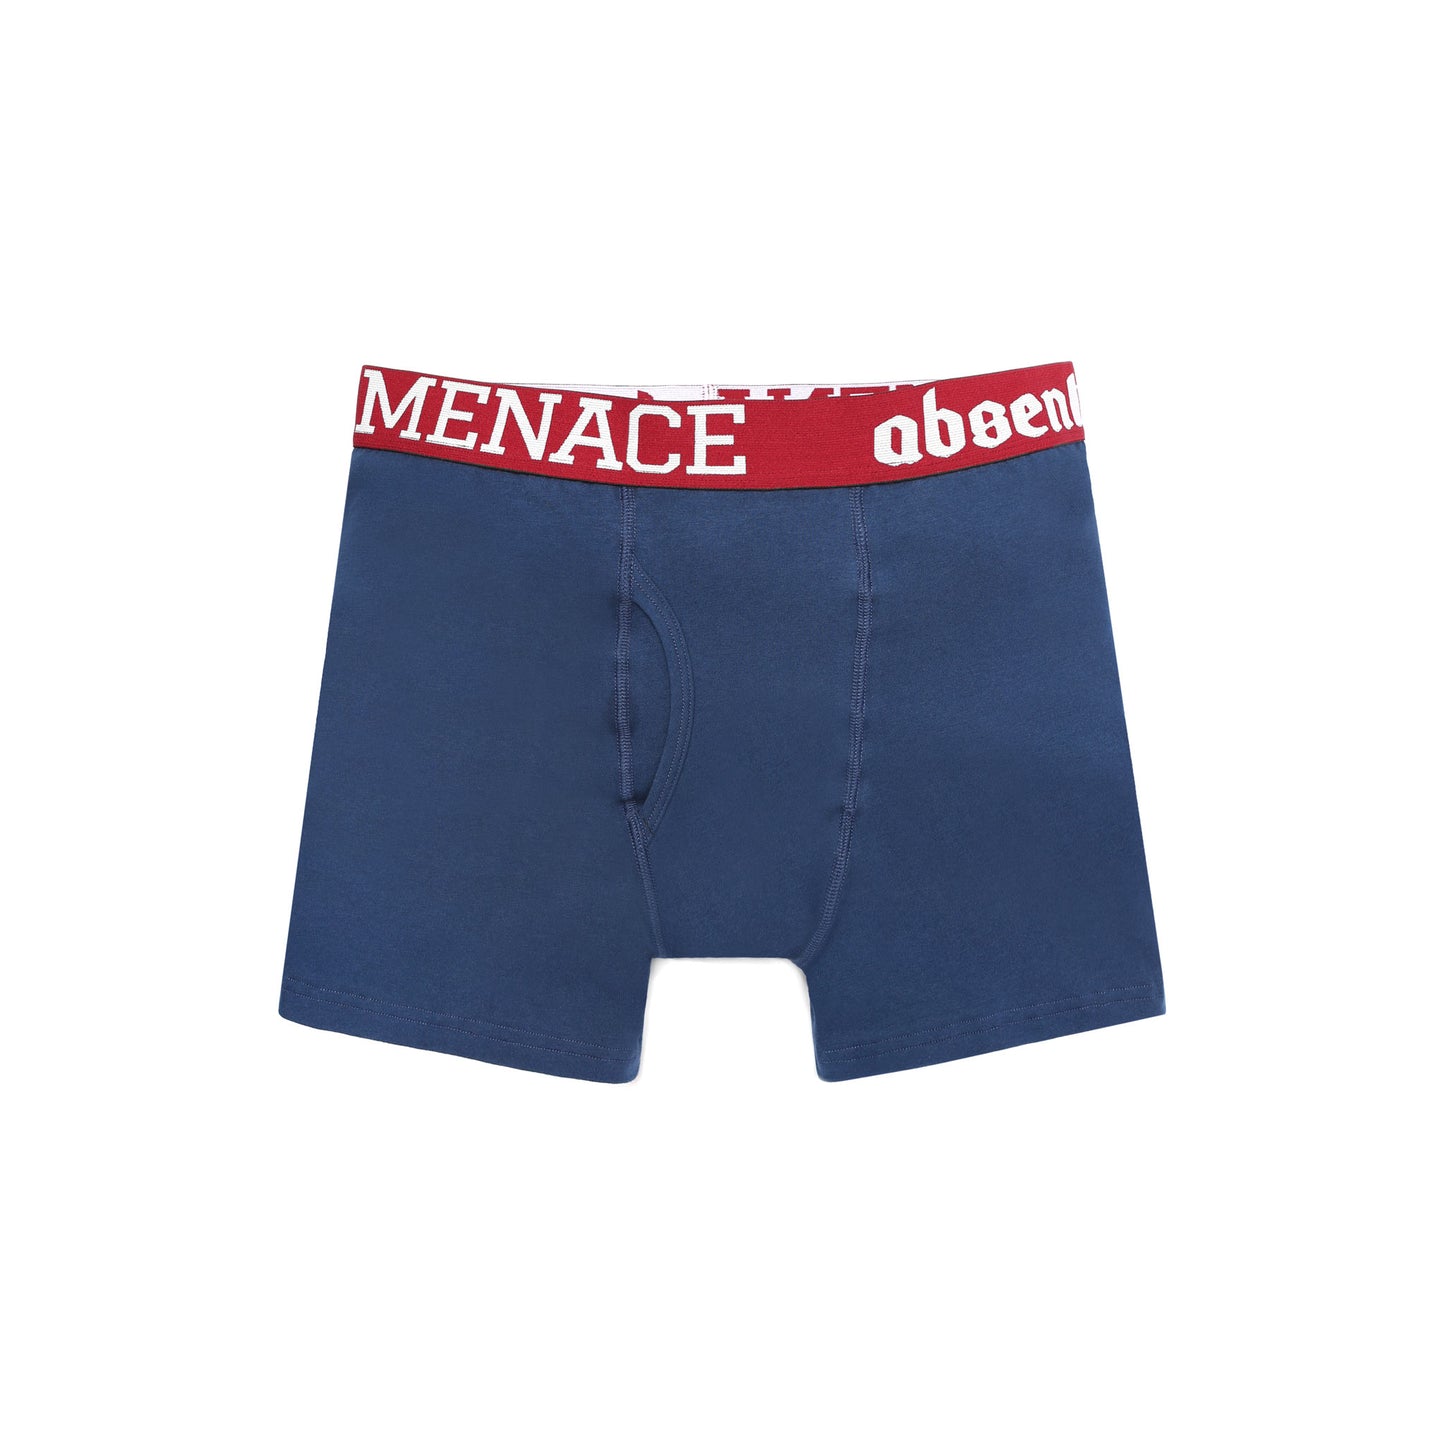 MENACE ABSENT BOXER BRIEFS (2 PACK) by MENACE